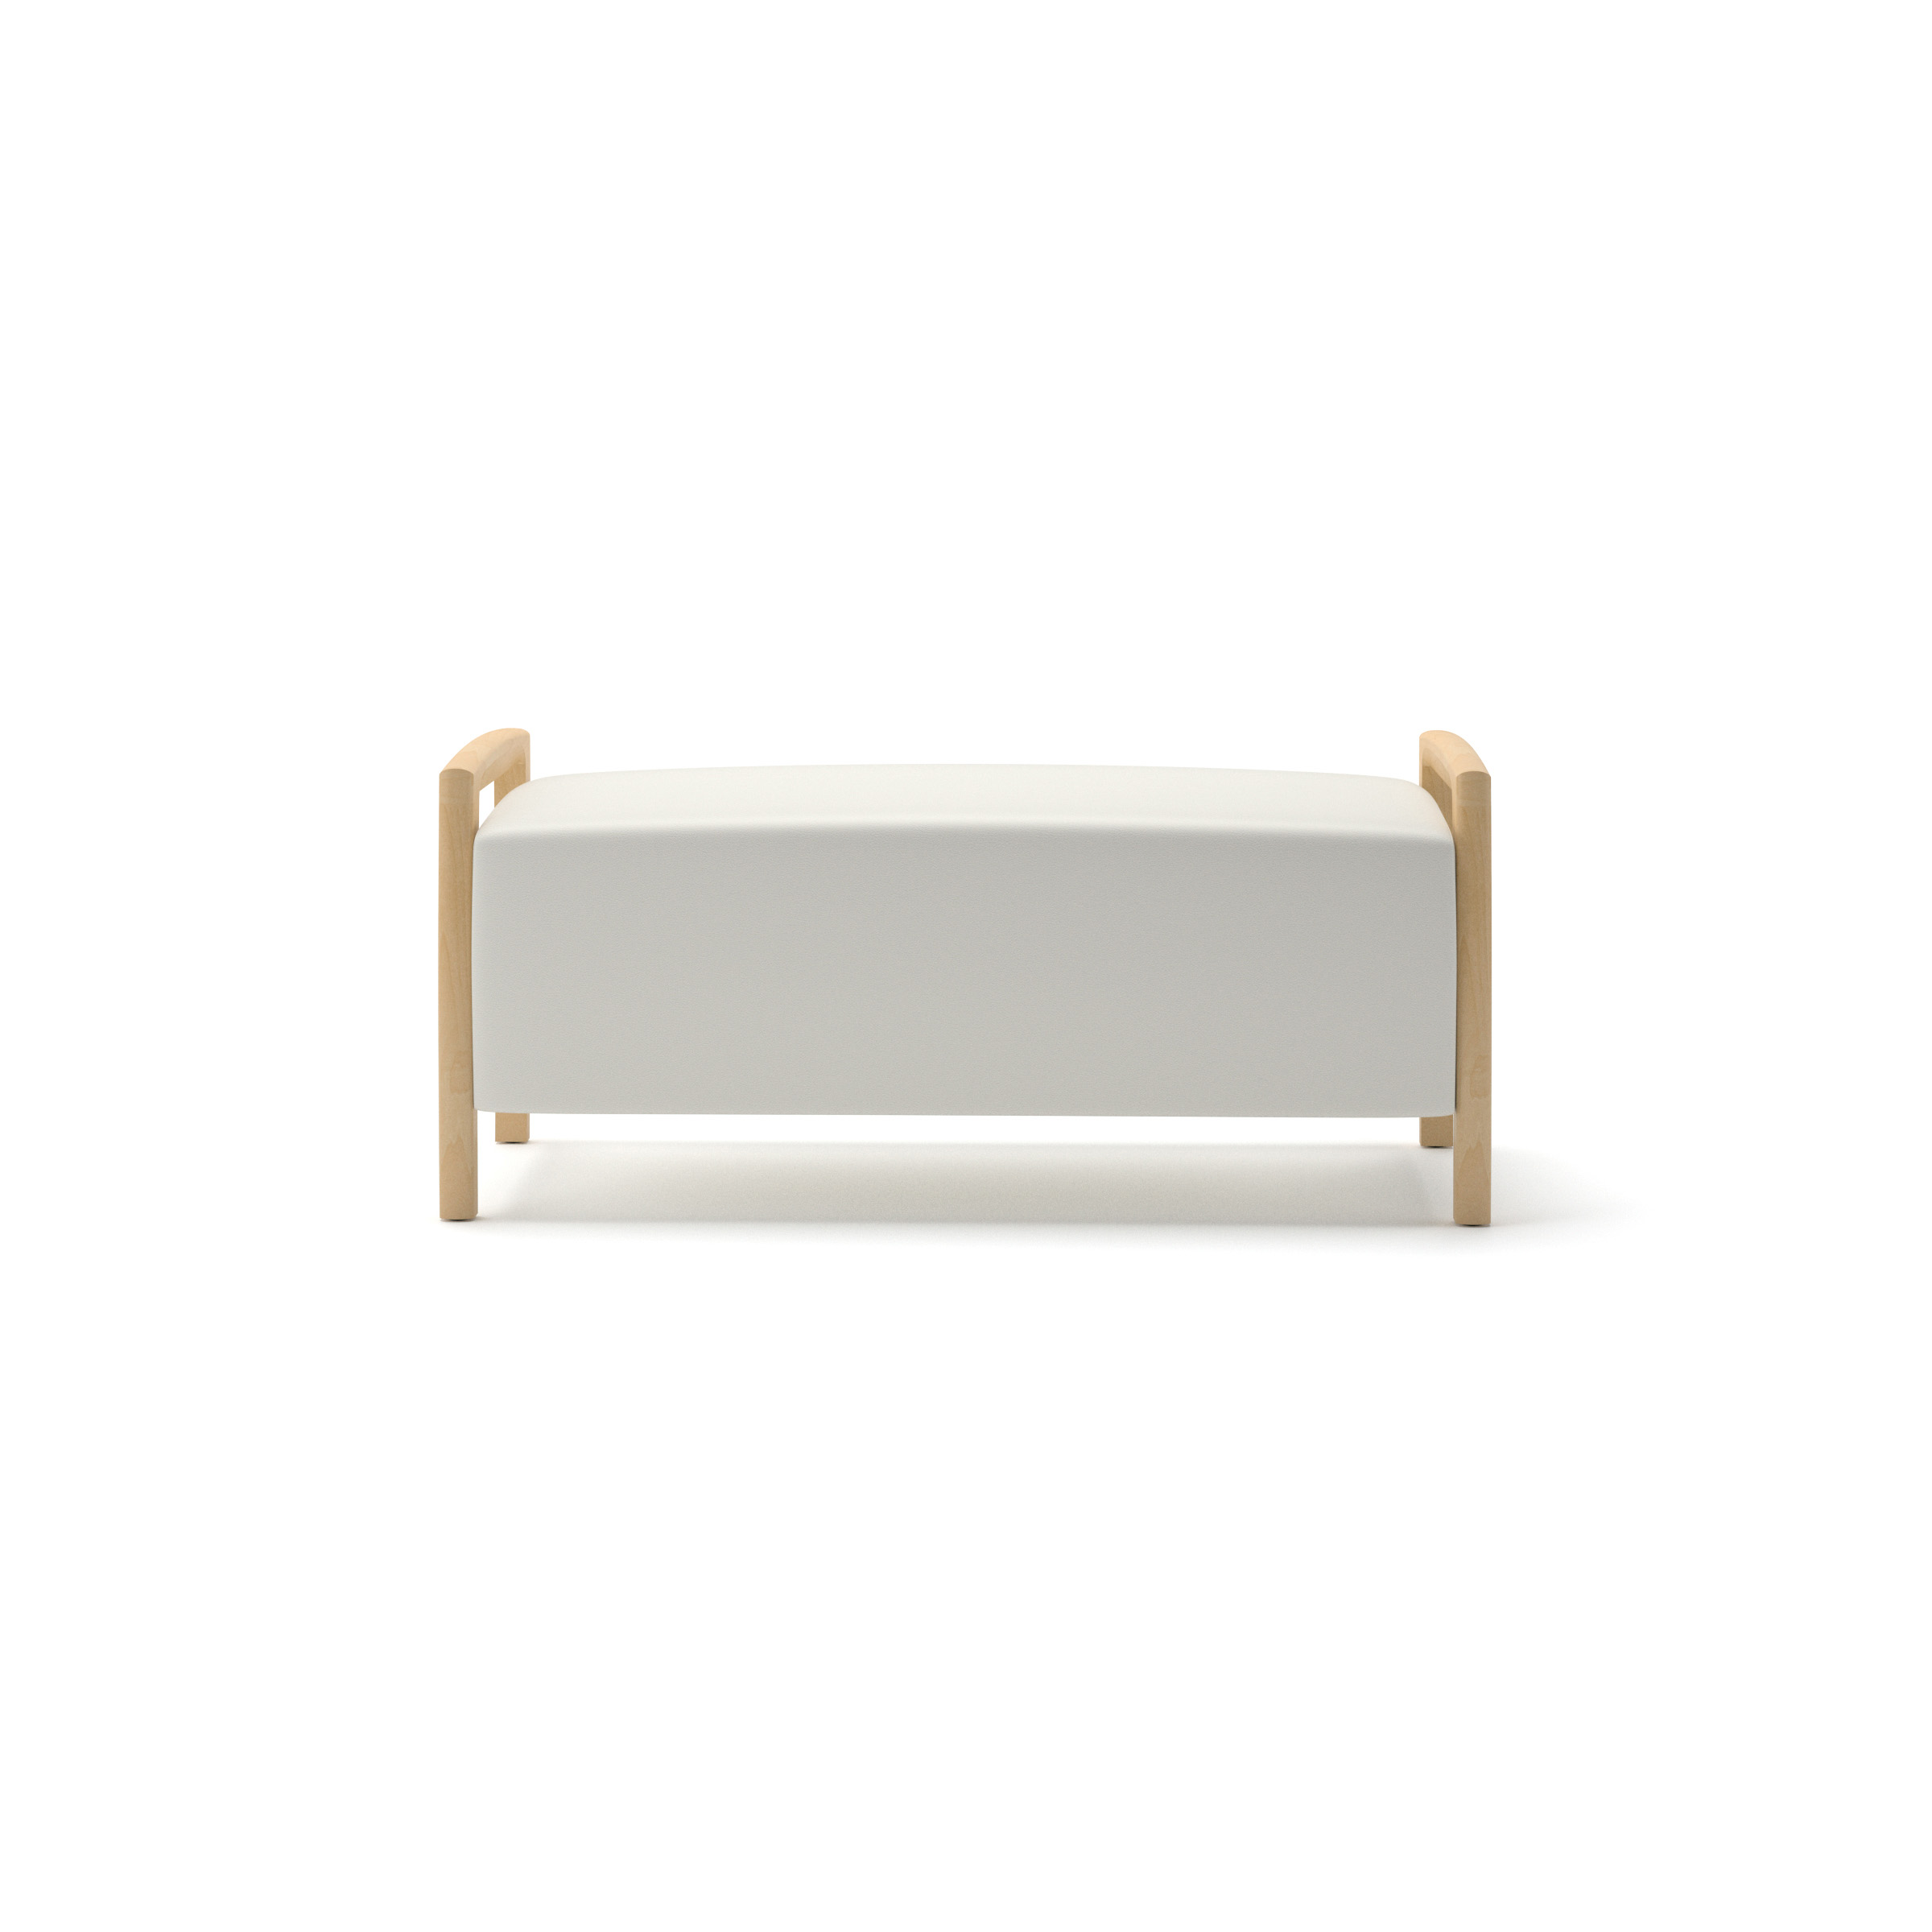 Integra Seating, Coastal Wood Bench. Available in multiple lengths: 45, 63, and 75